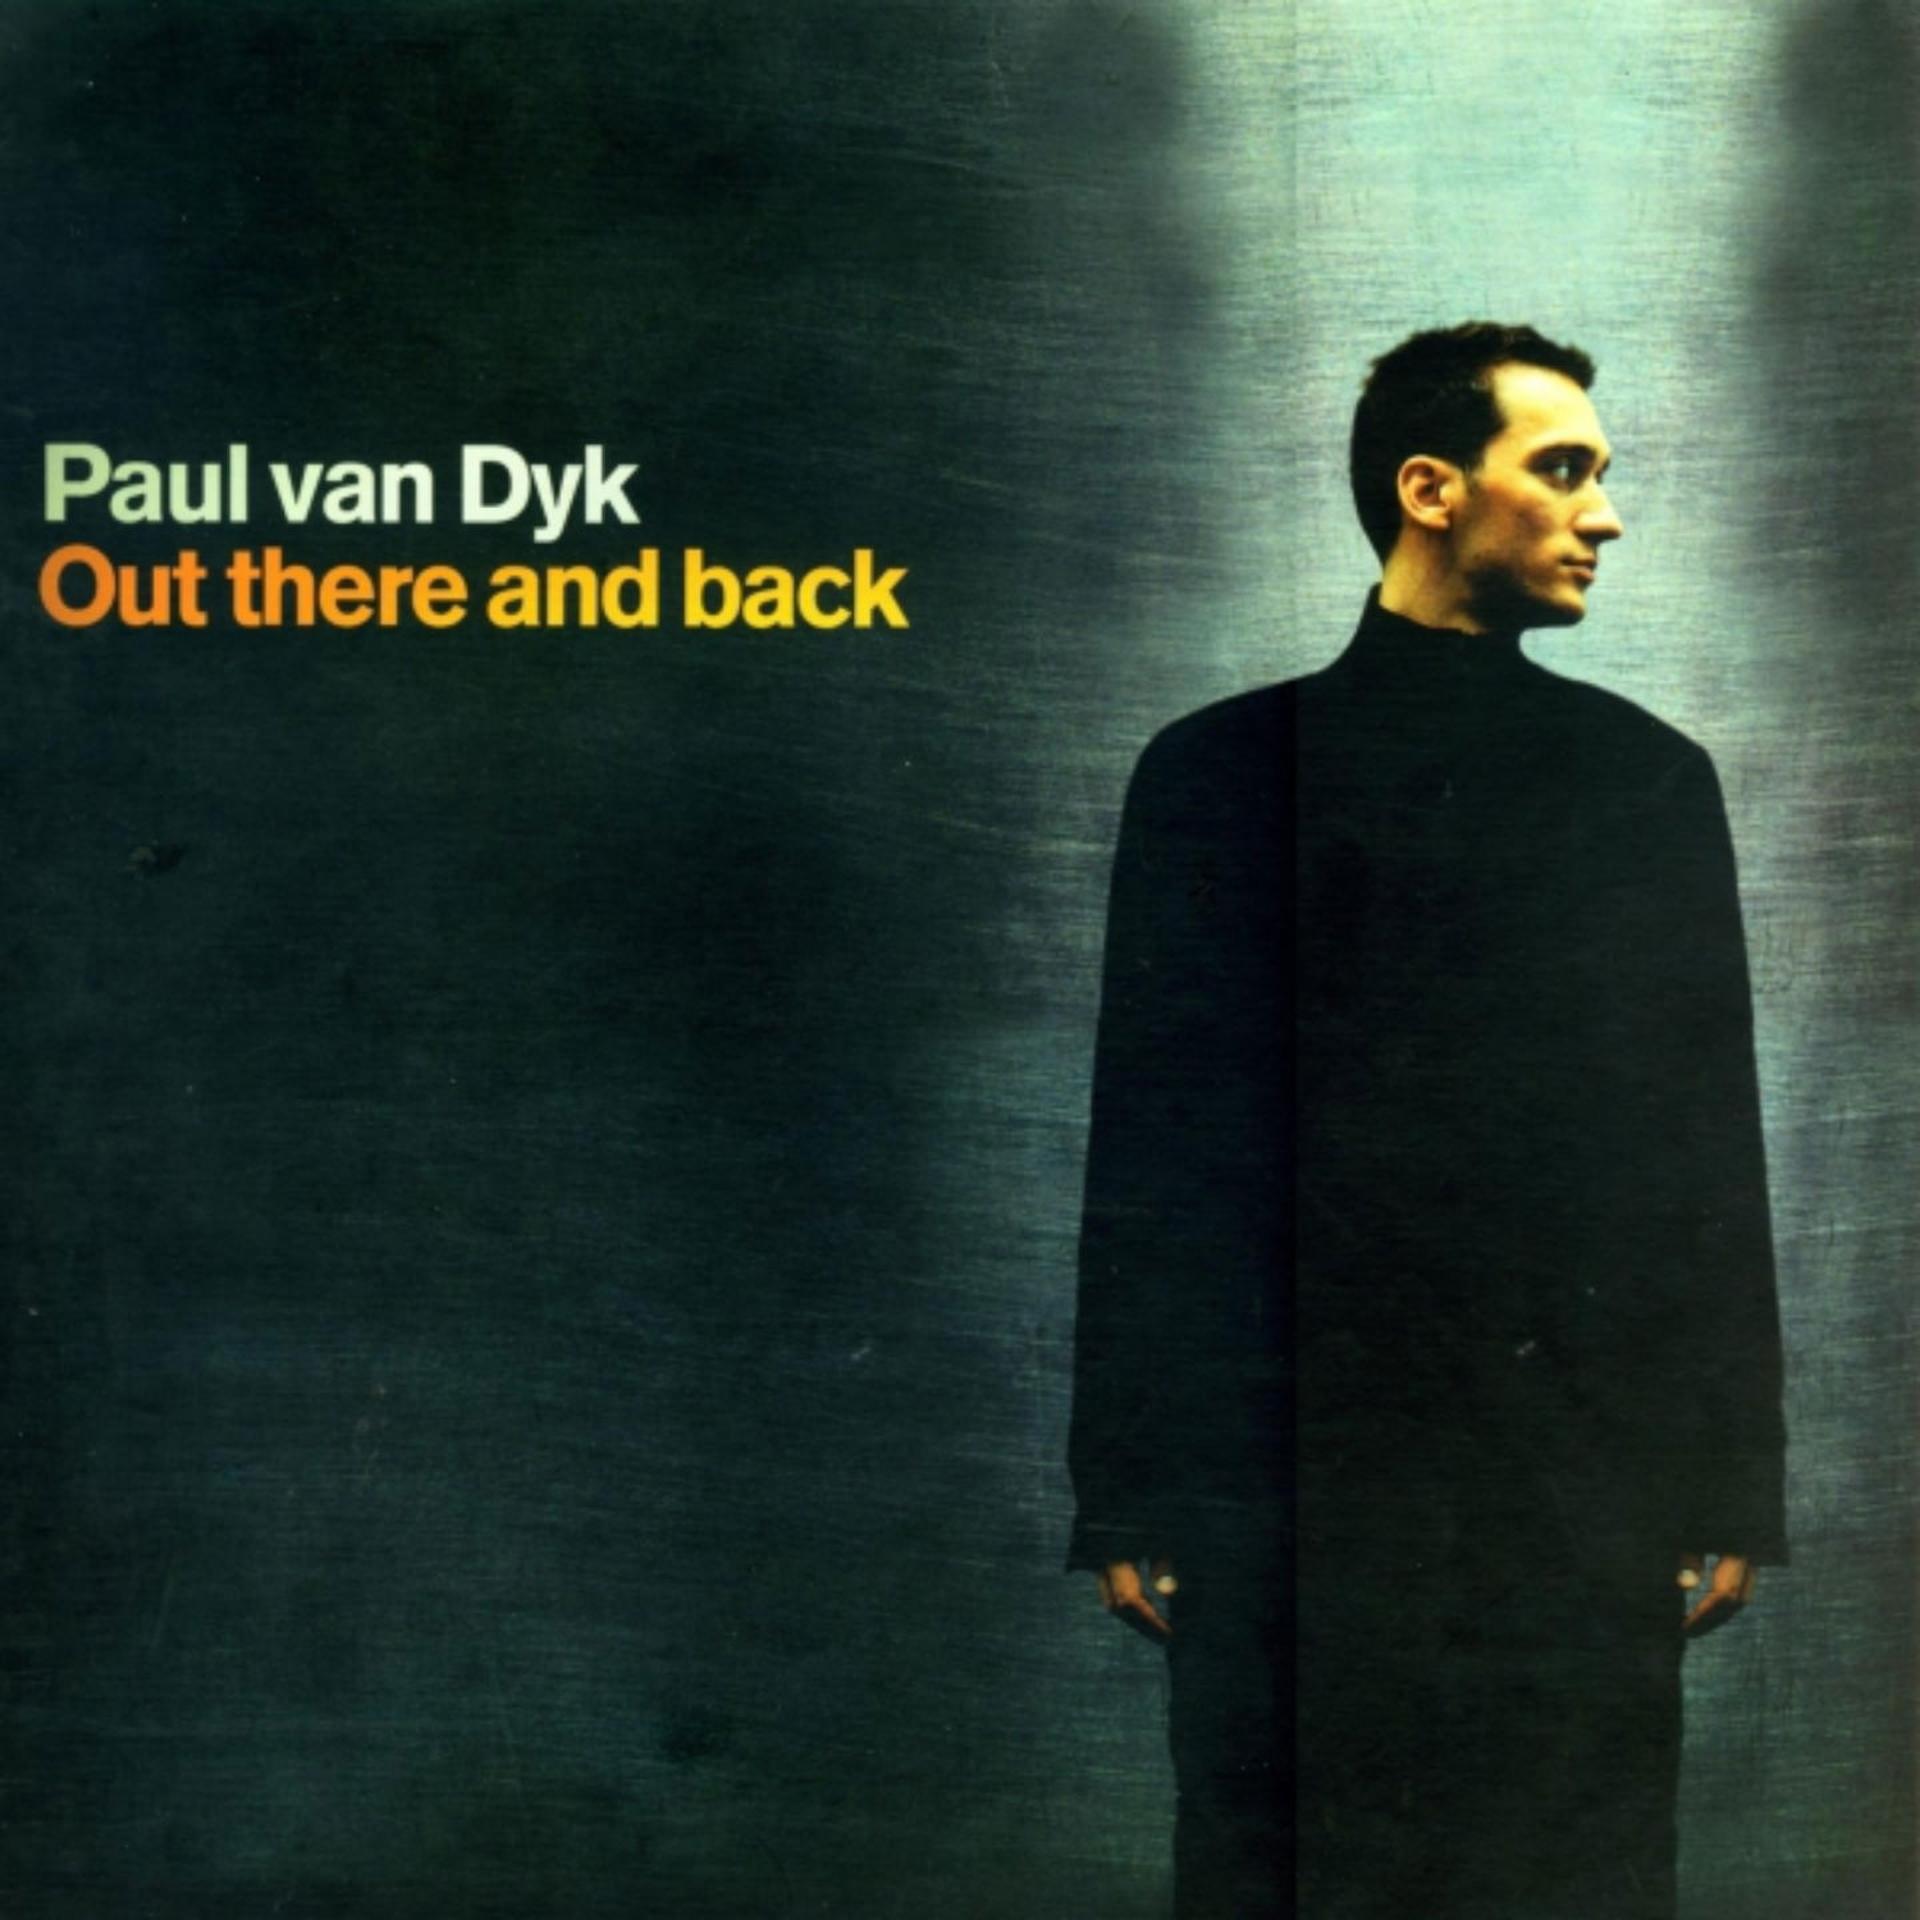 Paul back. Paul van Dyk out there and back. Paul van Dyk out there and back 2000. Paul van Dyk 2000. Пол Ван Дайк альбомы.